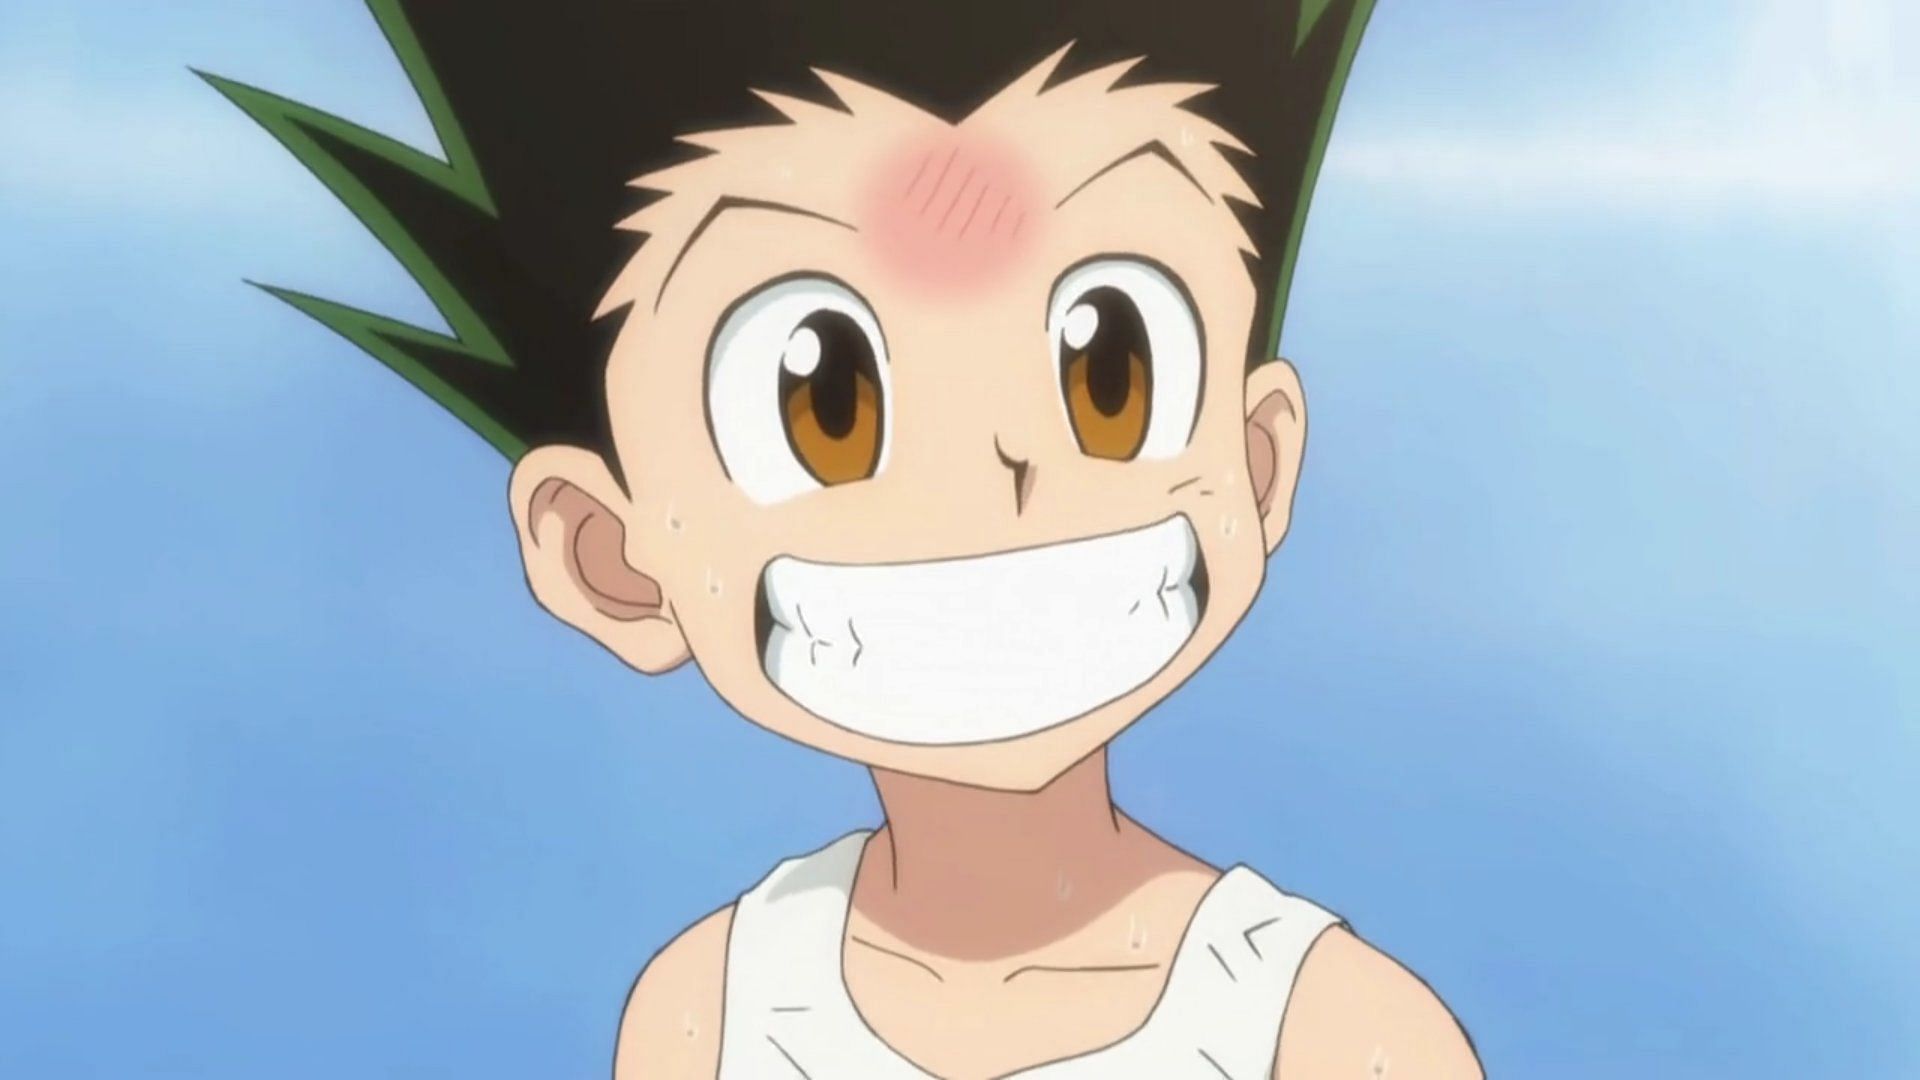 Gon as seen in the 2011 Hunter x Hunter anime series (Image via Madhouse Studios)